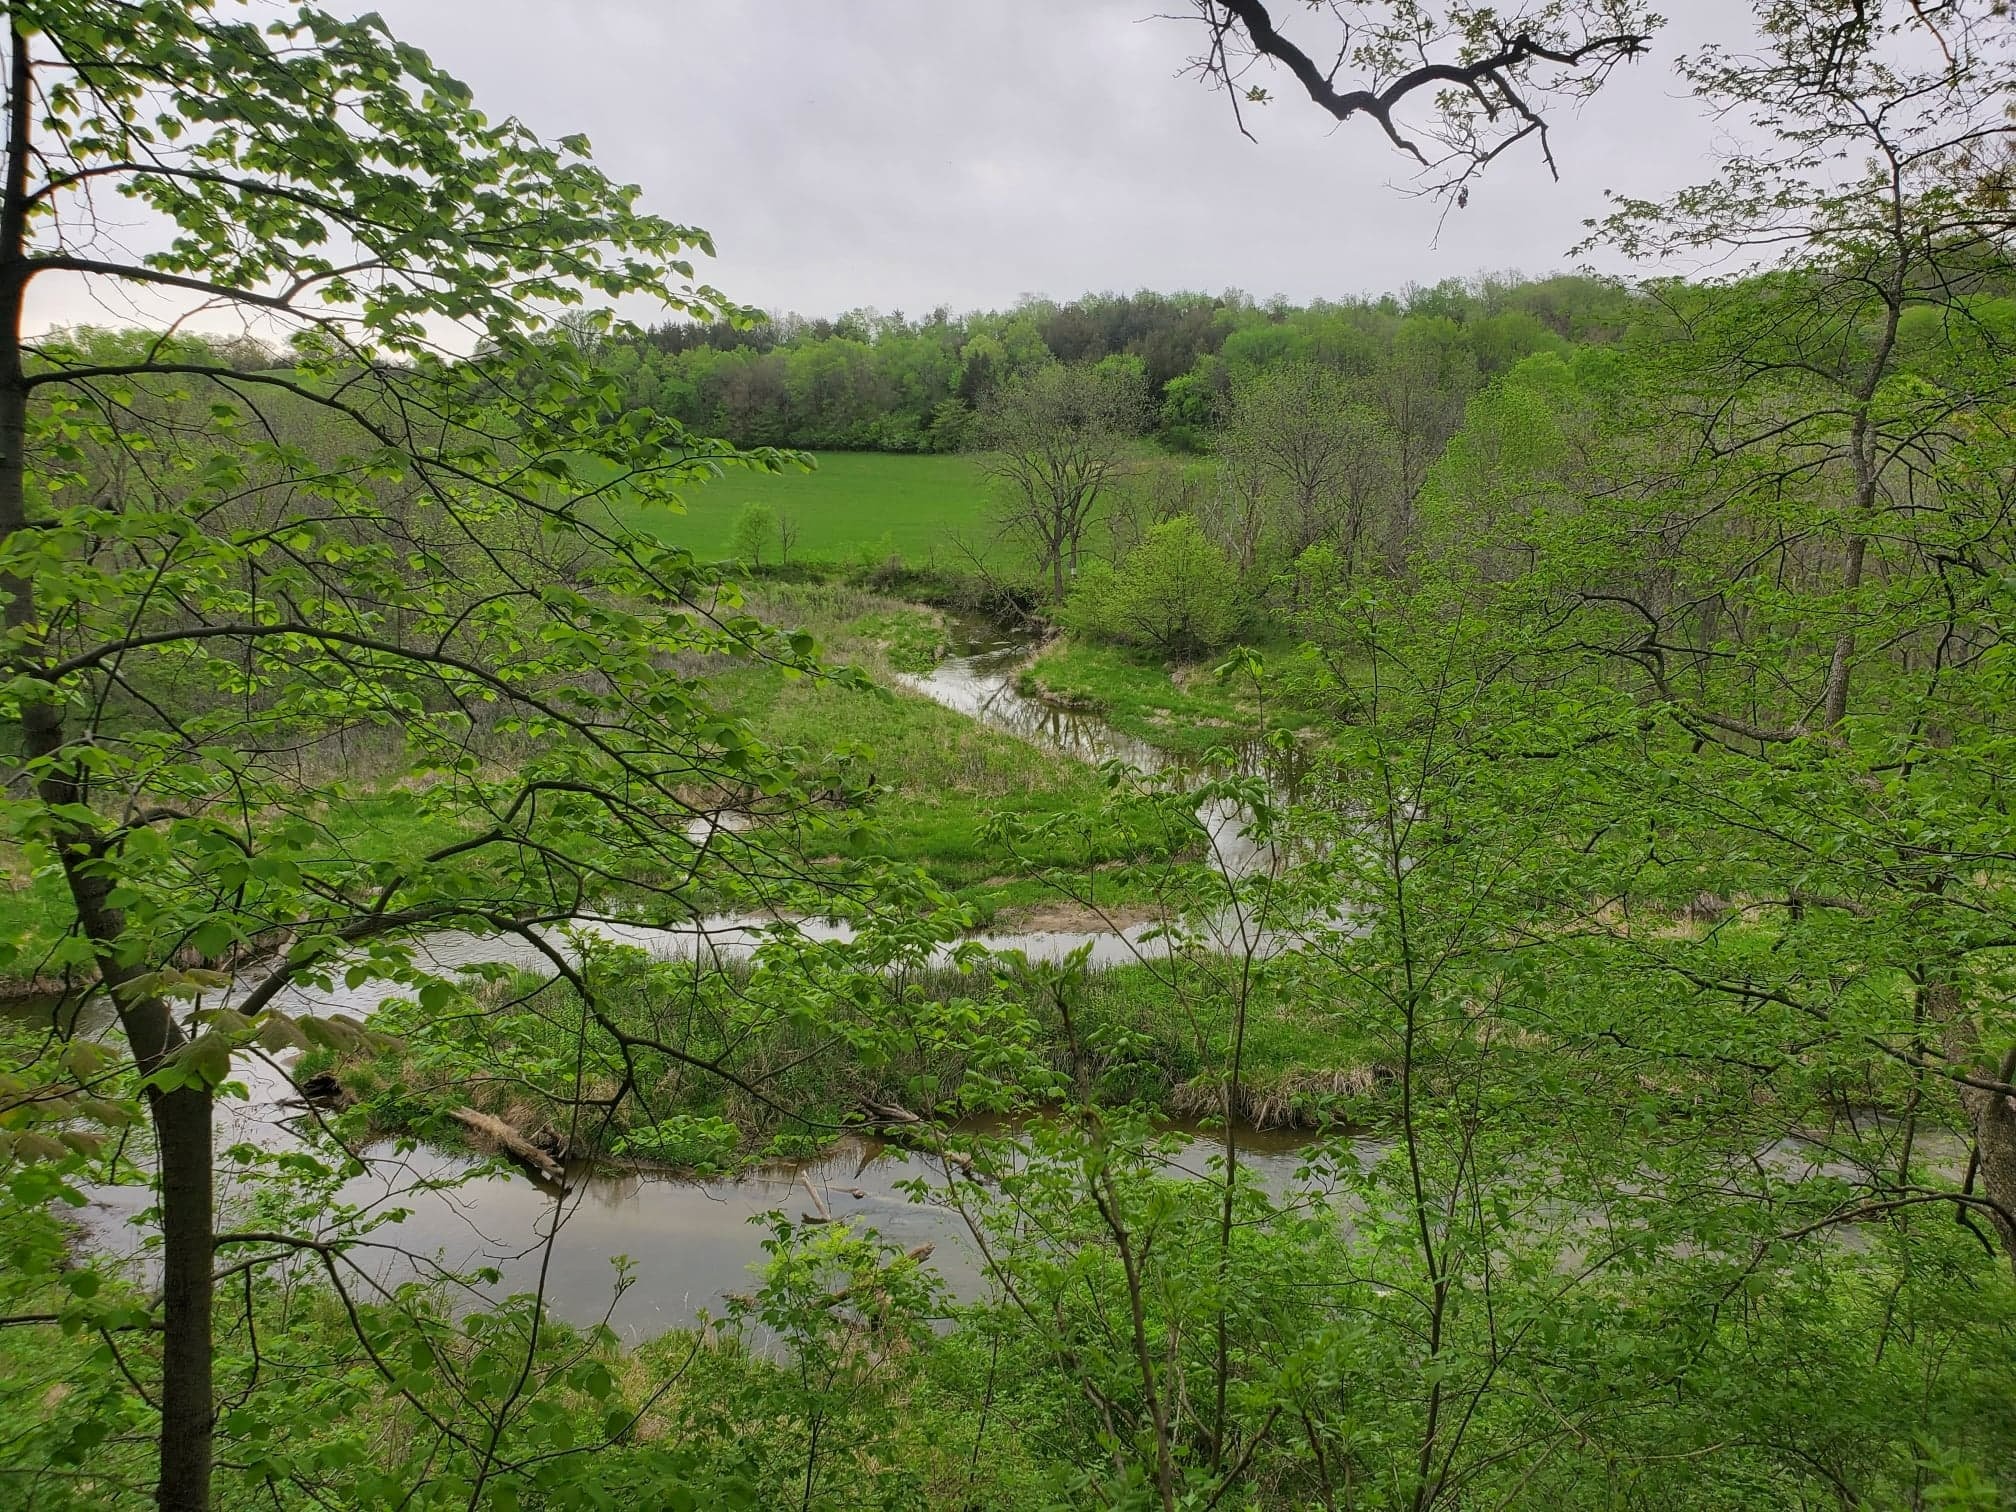 View of a rivers and green fields.